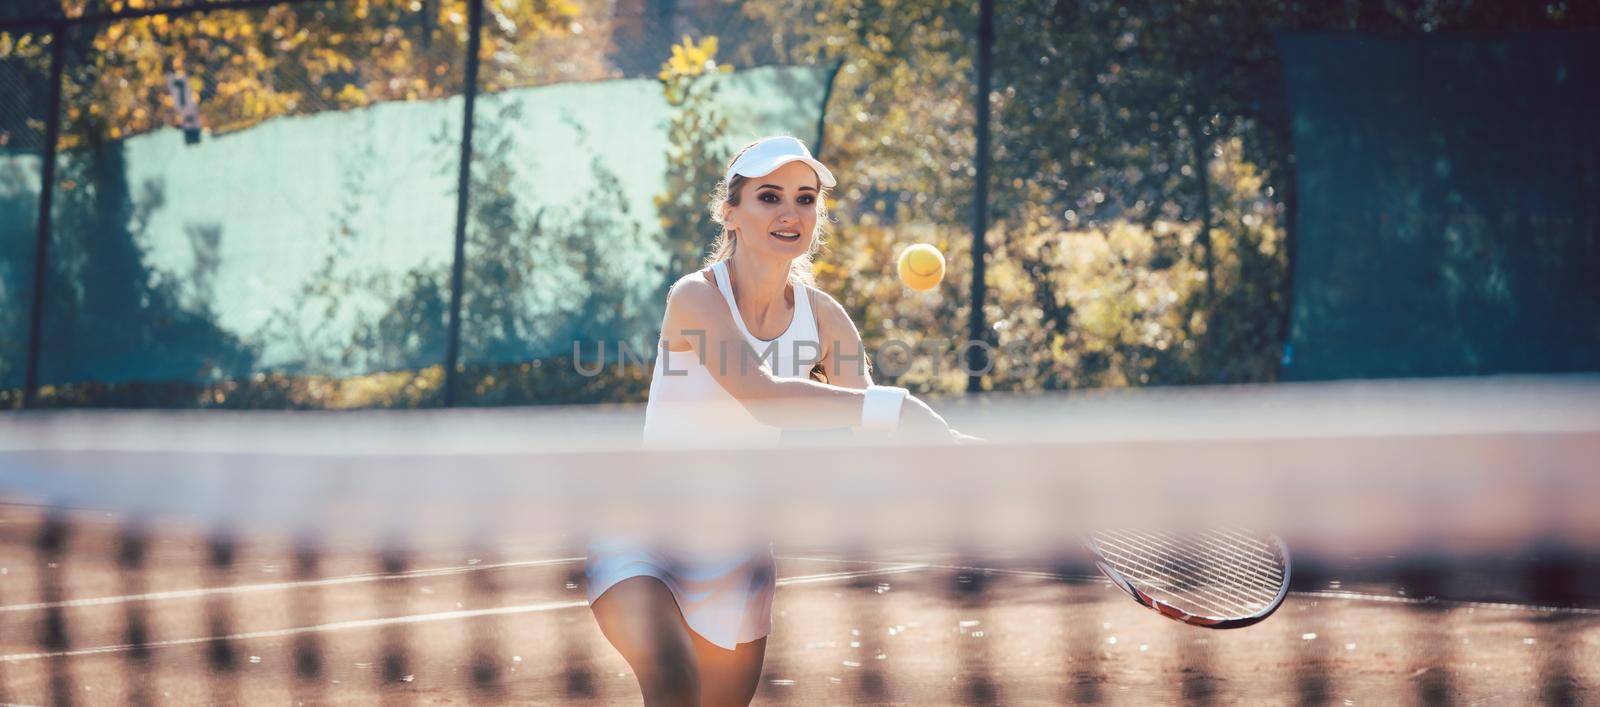 Woman player getting a ball on the tennis court